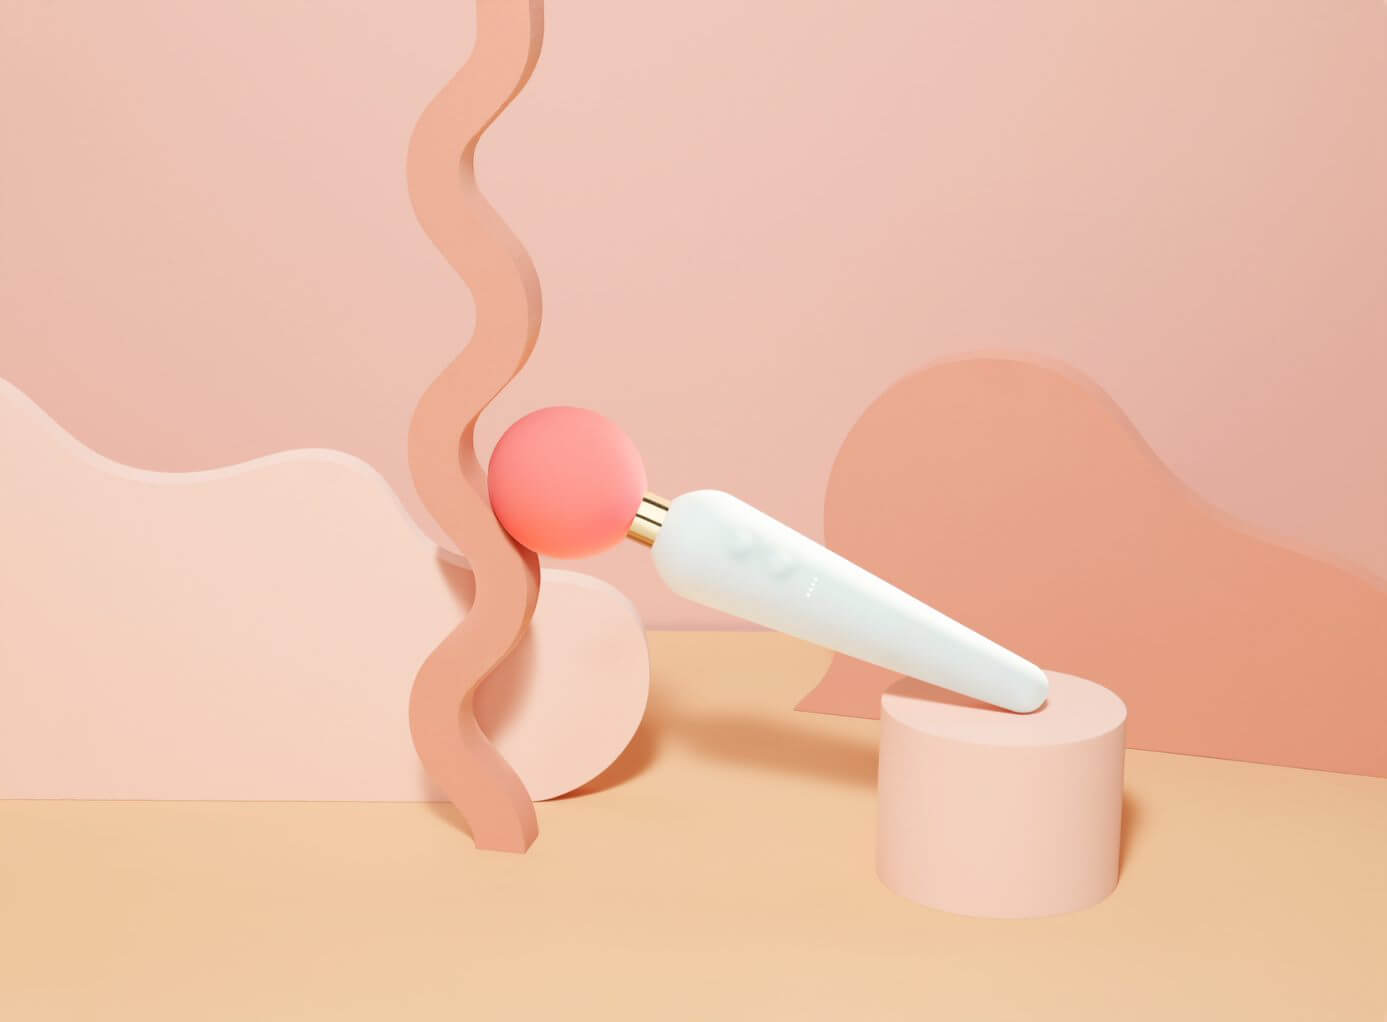 See The Goop Double-Sided Wand Vibrator In Action | Goop